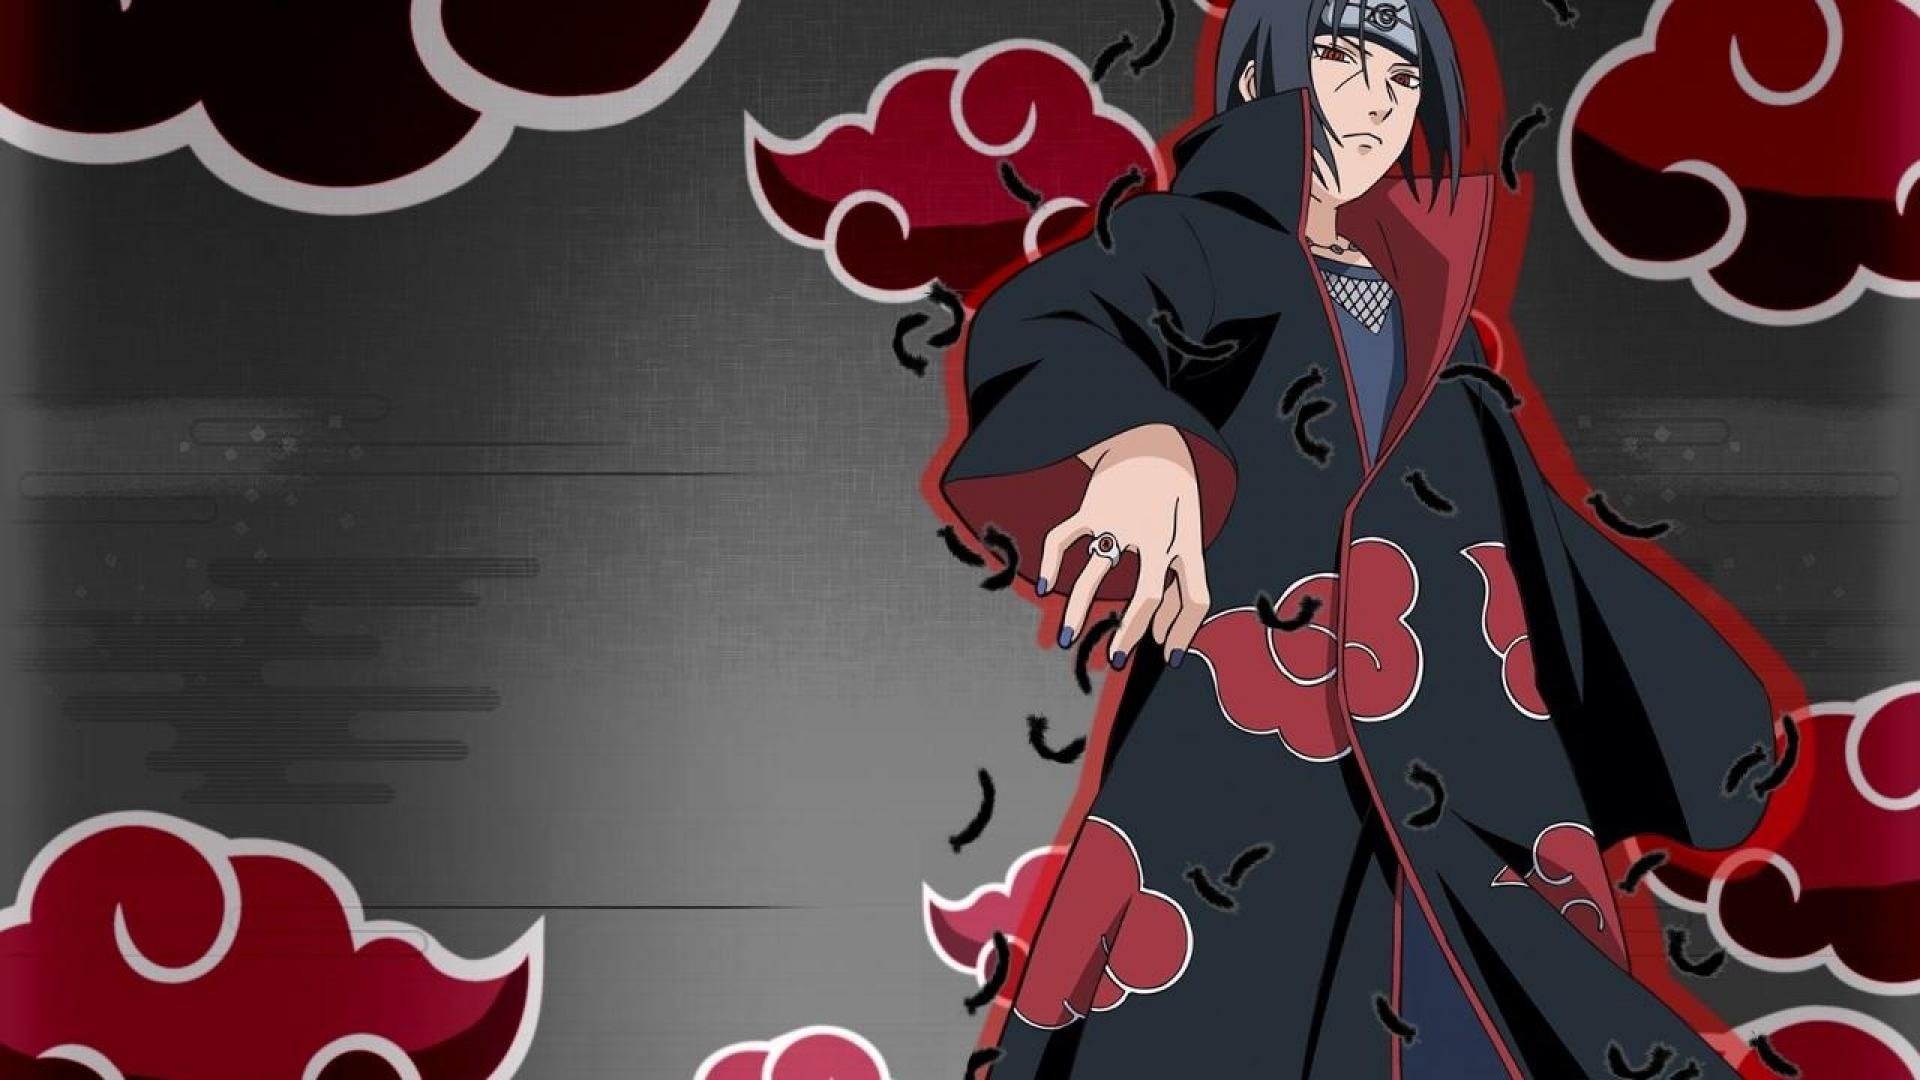 Itachi Uchiha wallpaper ·① Download free awesome backgrounds for desktop computers and ...